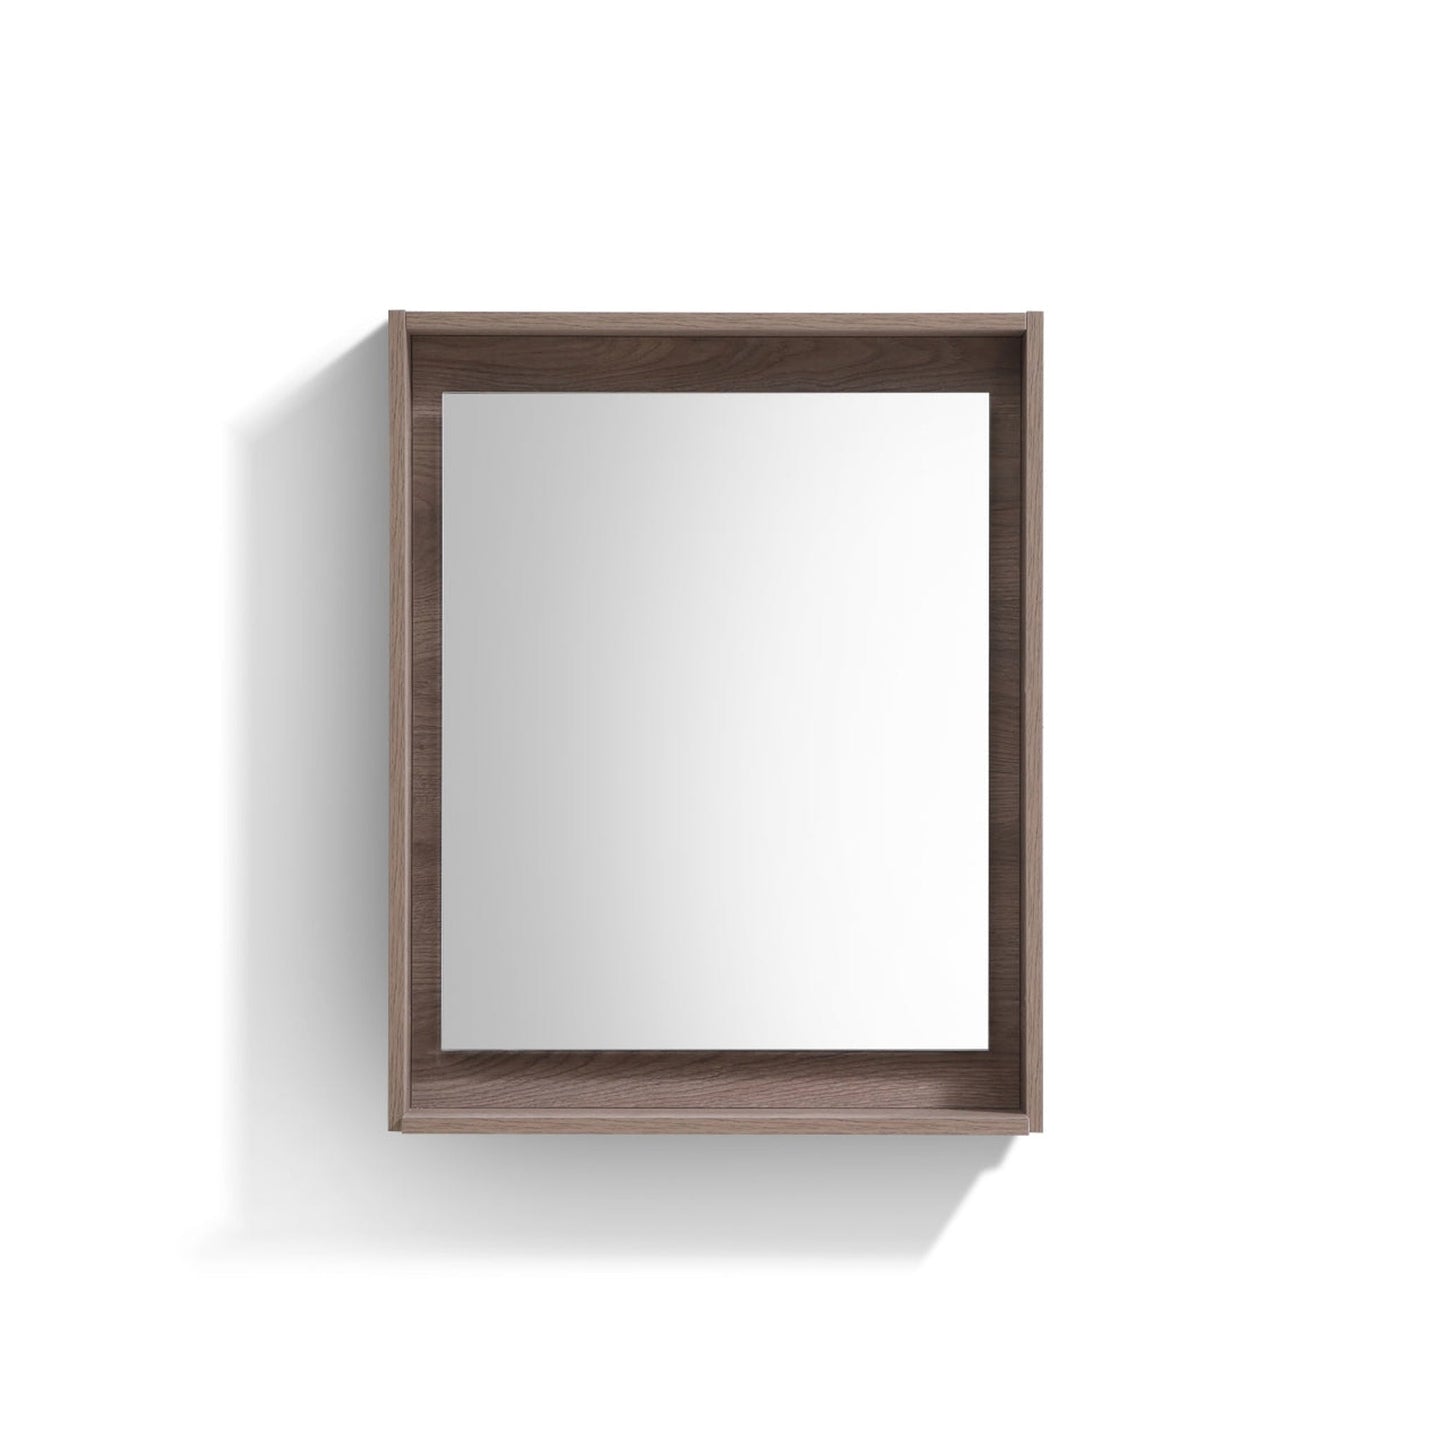 KubeBath Bliss 24" Butternut Wall-Mounted Modern Bathroom Vanity With Single Integrated Acrylic Sink With Overflow and 24" Butternut Framed Mirror With Shelf